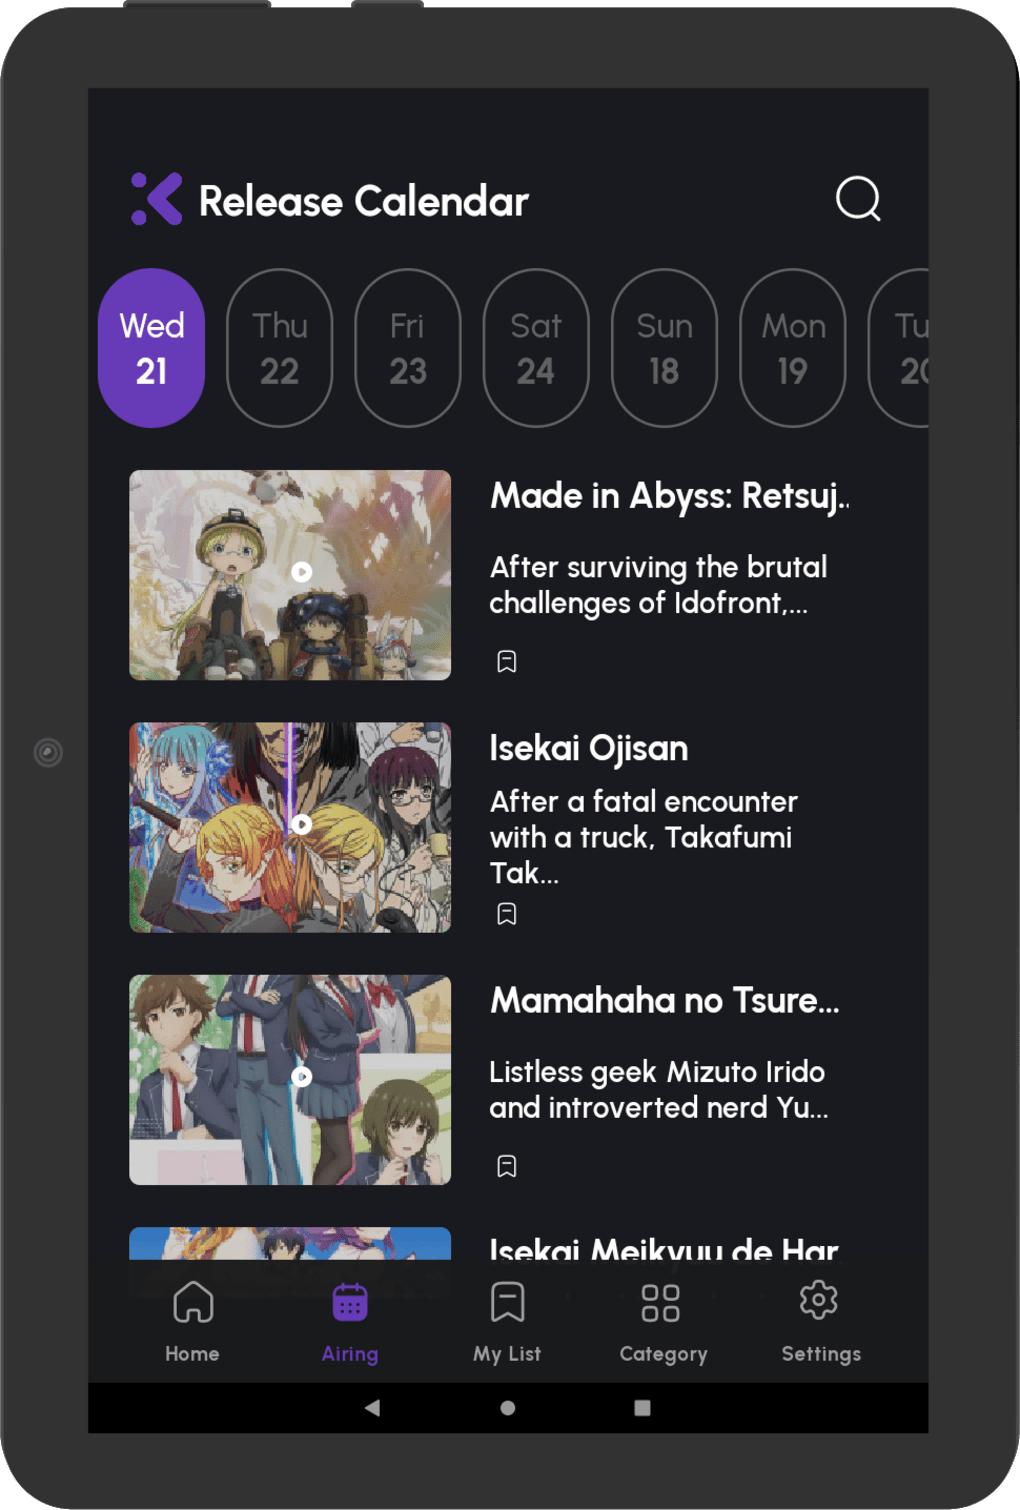 7 Best Apps for iPhone to Watch Anime for Free - atozapplesilicon